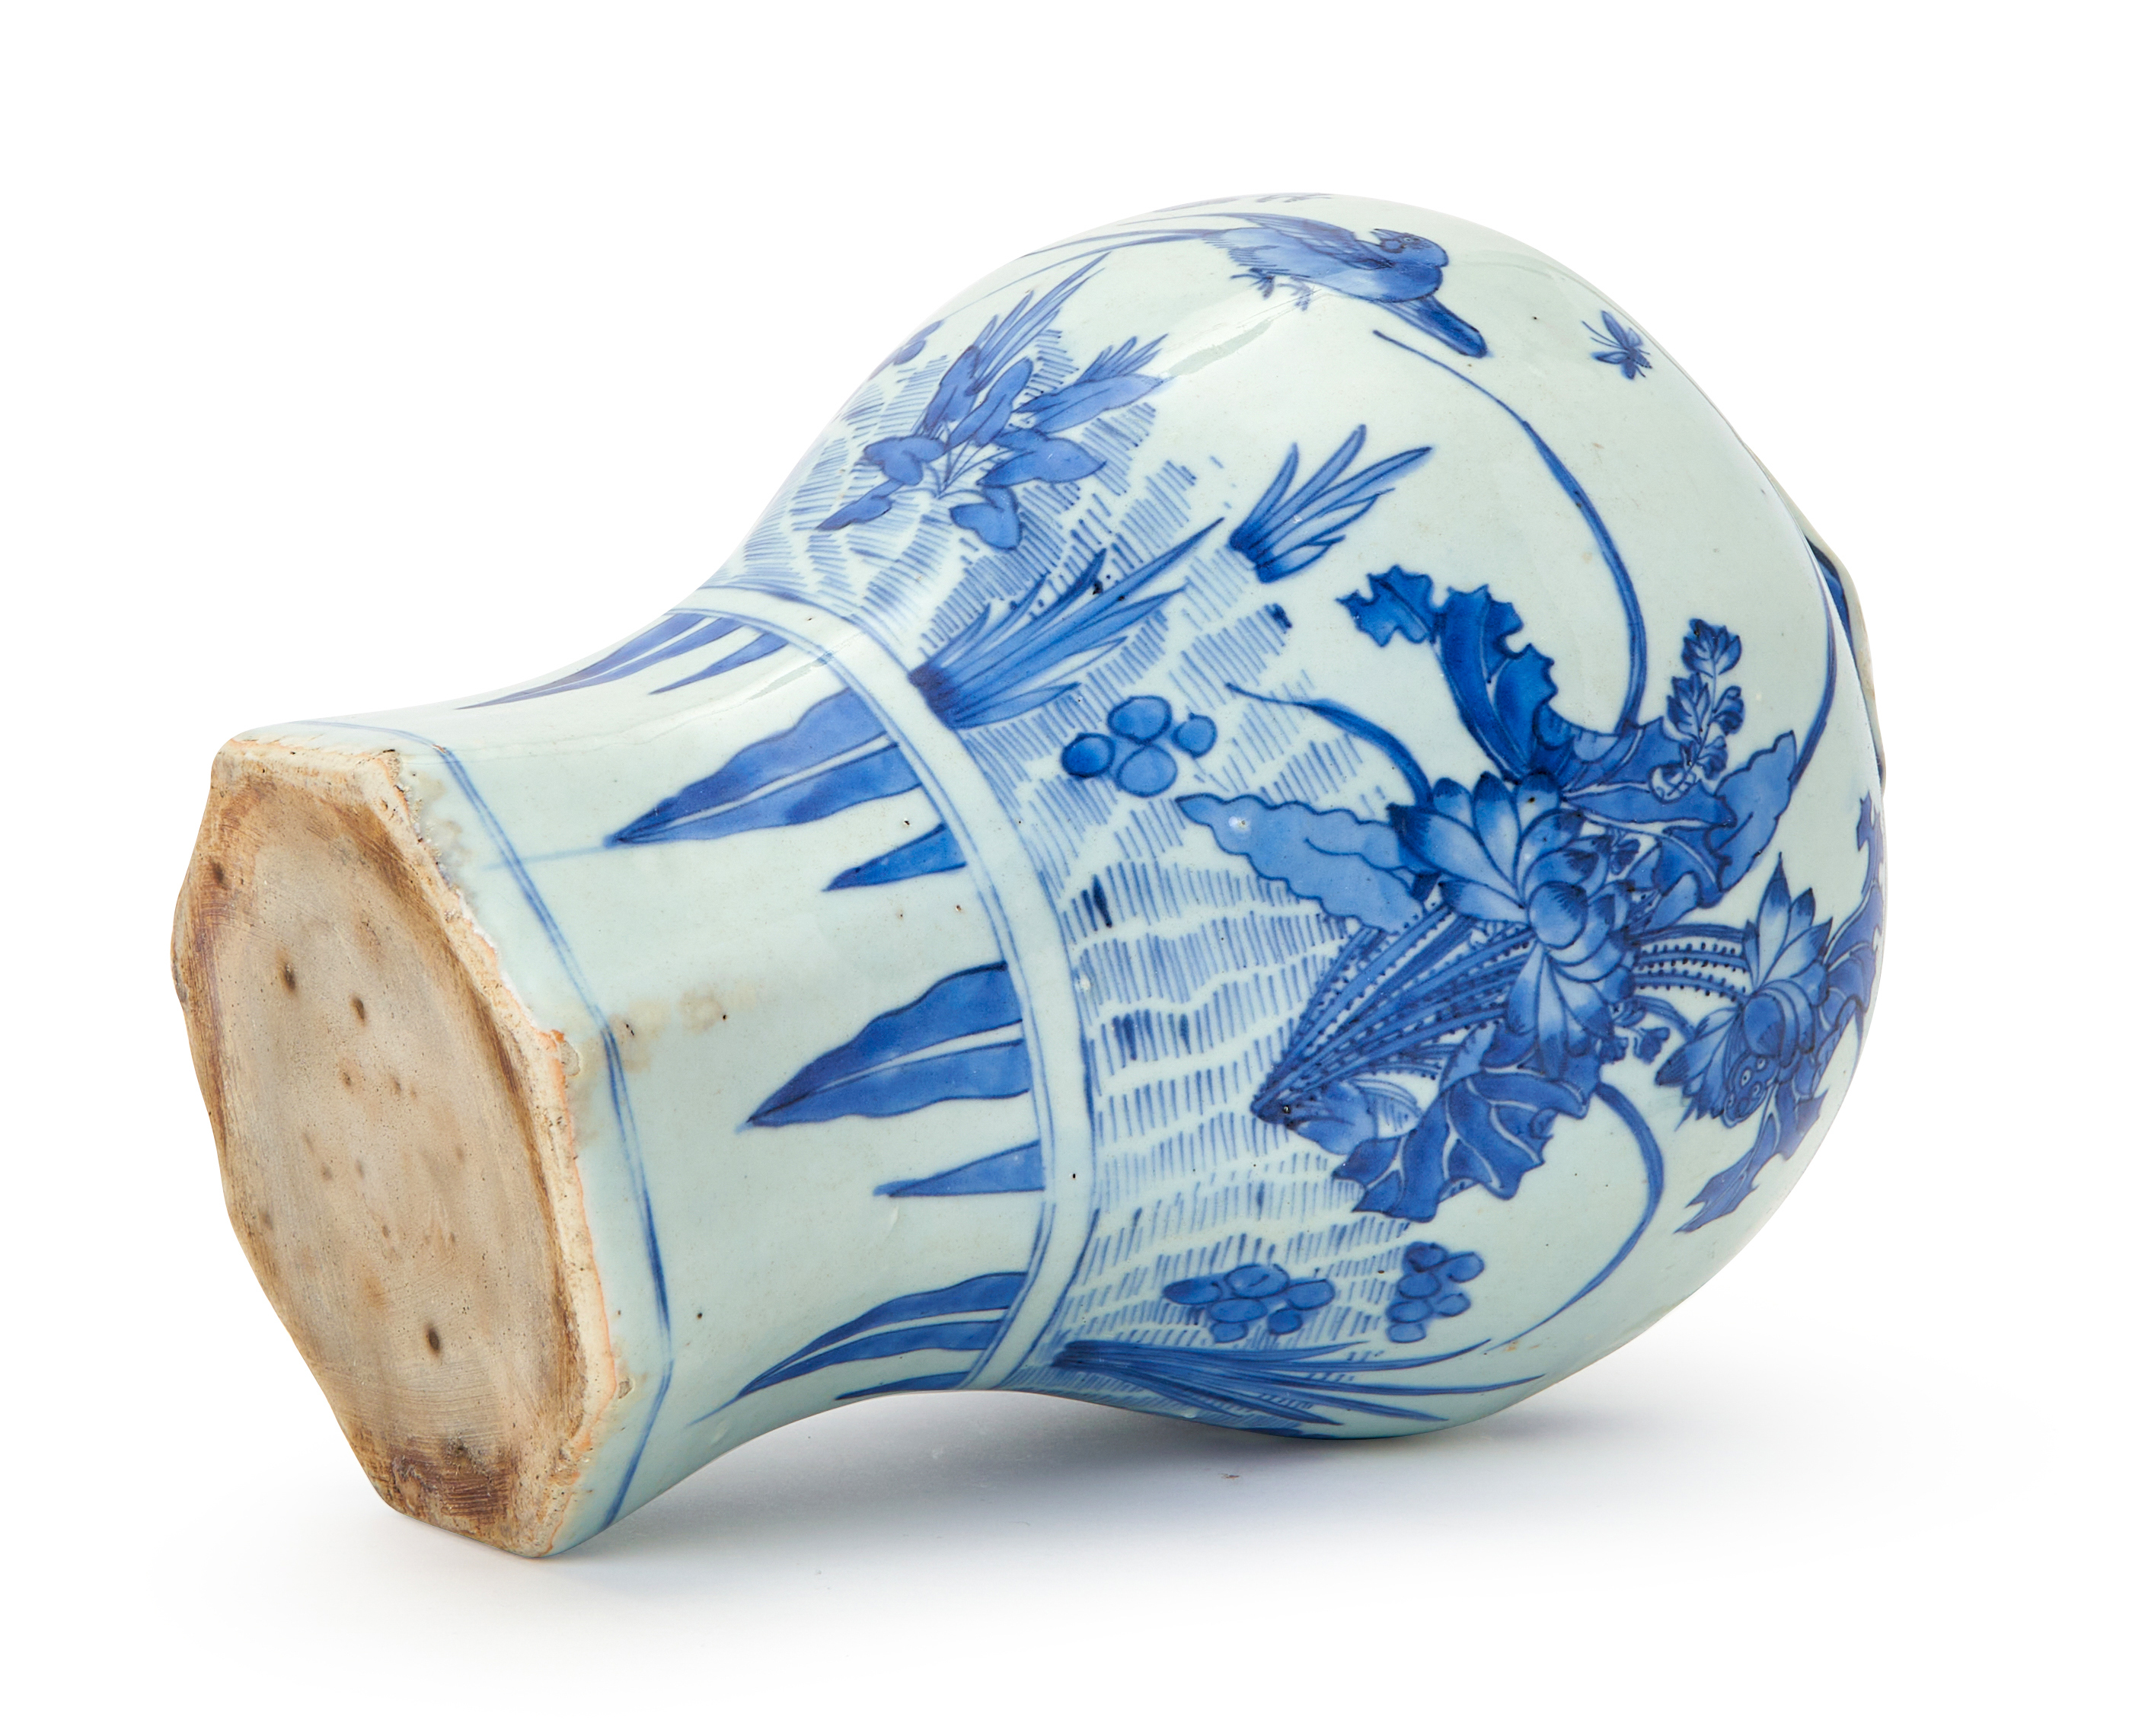 A CHINESE BLUE & WHITE JAR, TRANSITIONAL PERIOD, 17TH CENTURY - Image 4 of 4